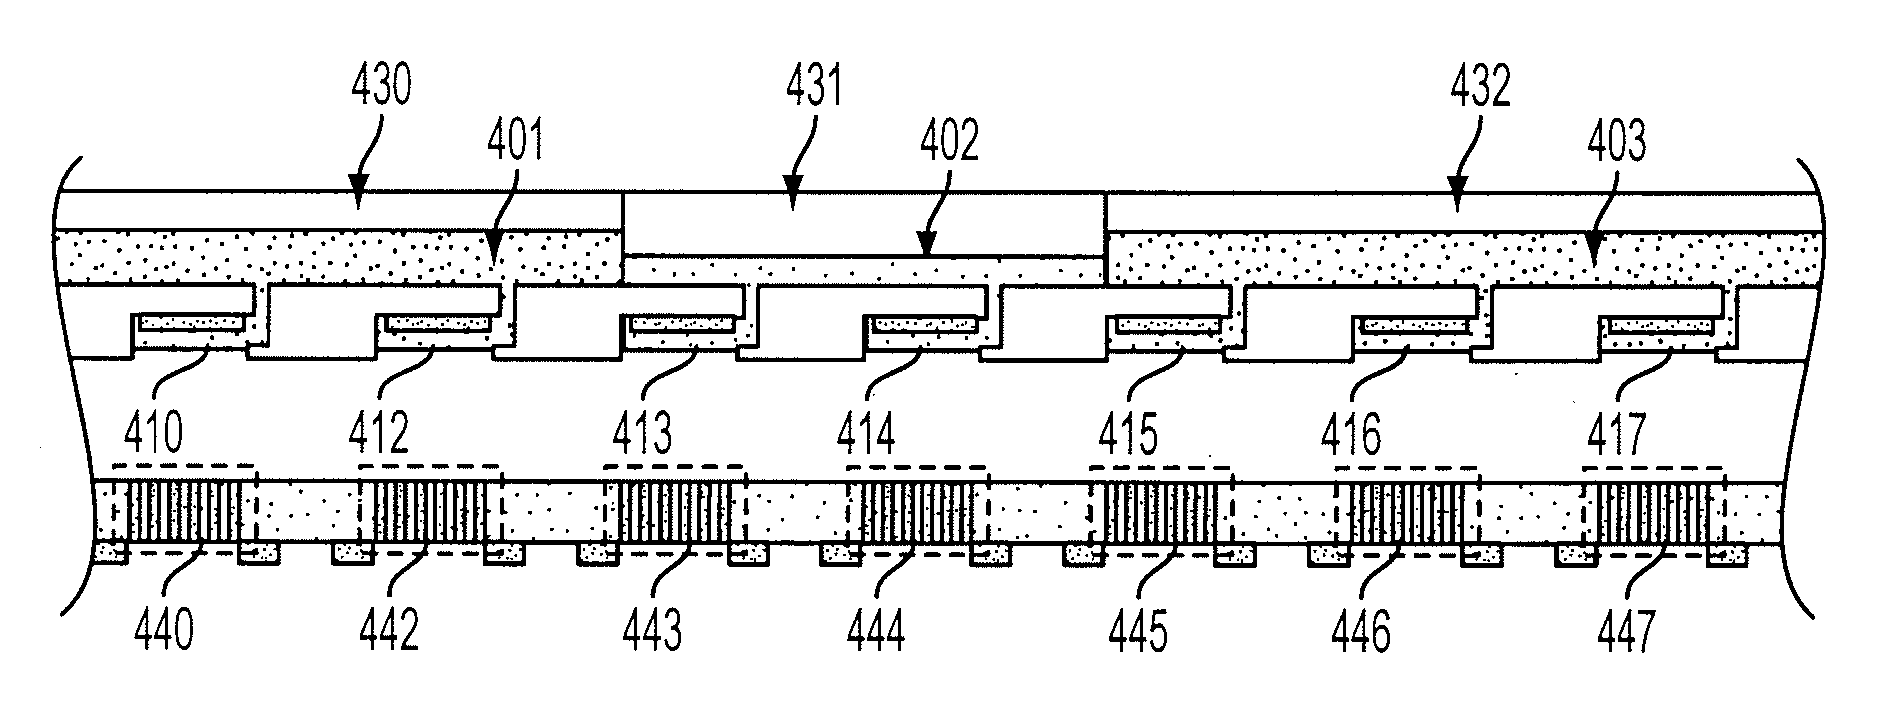 Method and apparatus for depositing films